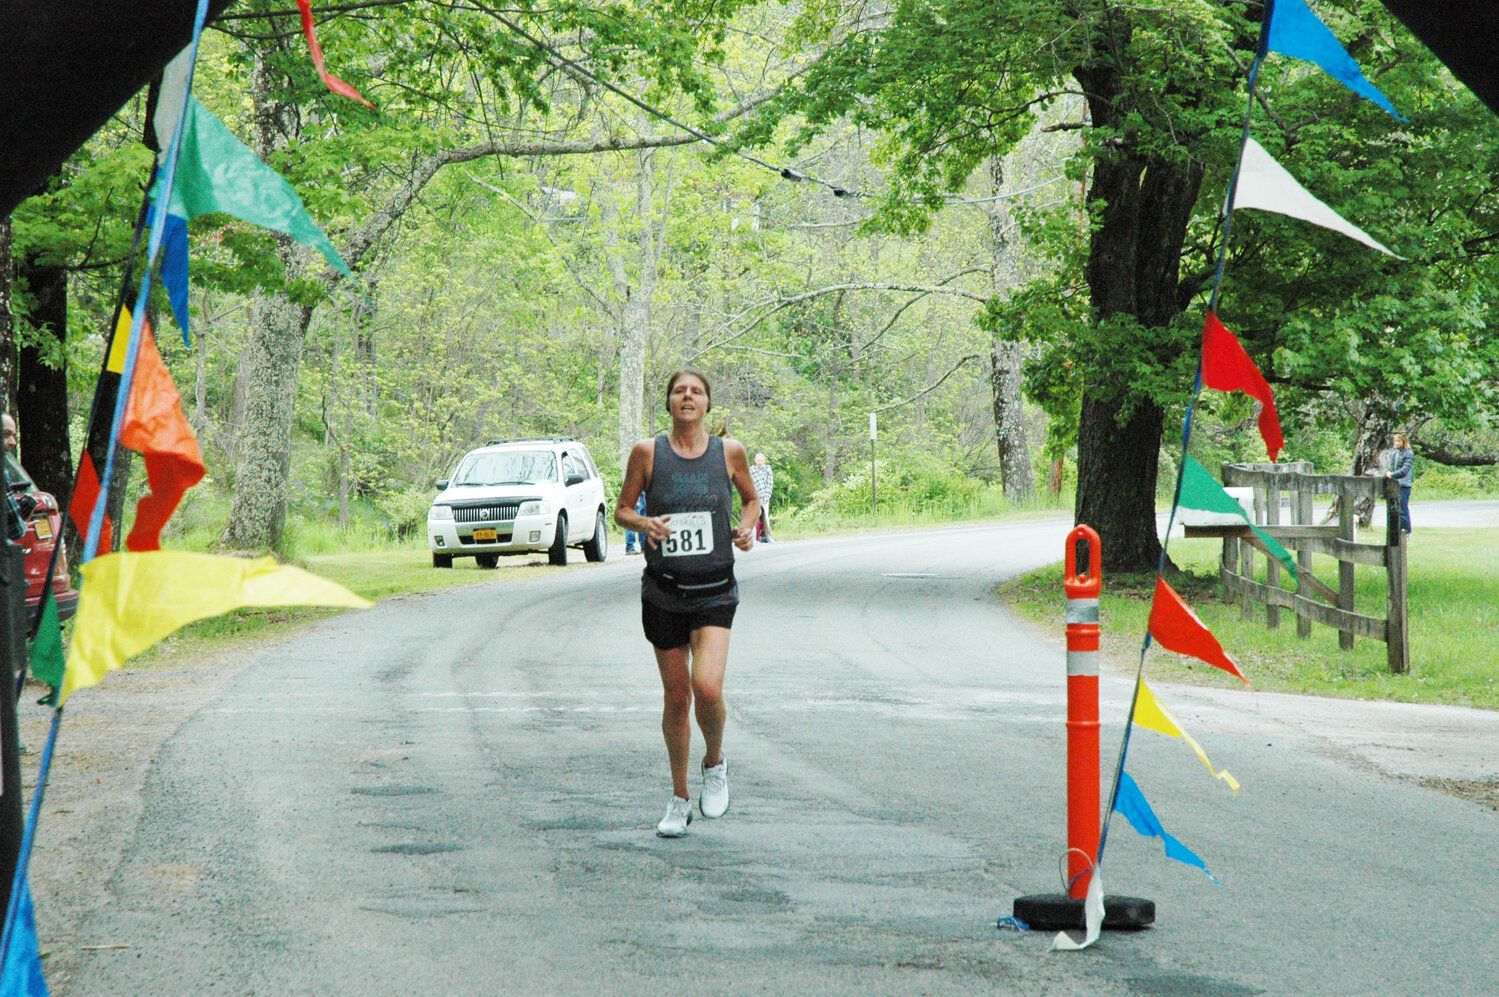 Kristy Sigelakis of Jeffersonville was the first female runner and fourth runner overall to cross the finish line in the 2023 5K Sap Run on Saturday, May 20. This year’s race was in honor of John McCormack, who was recently diagnosed with ALS.